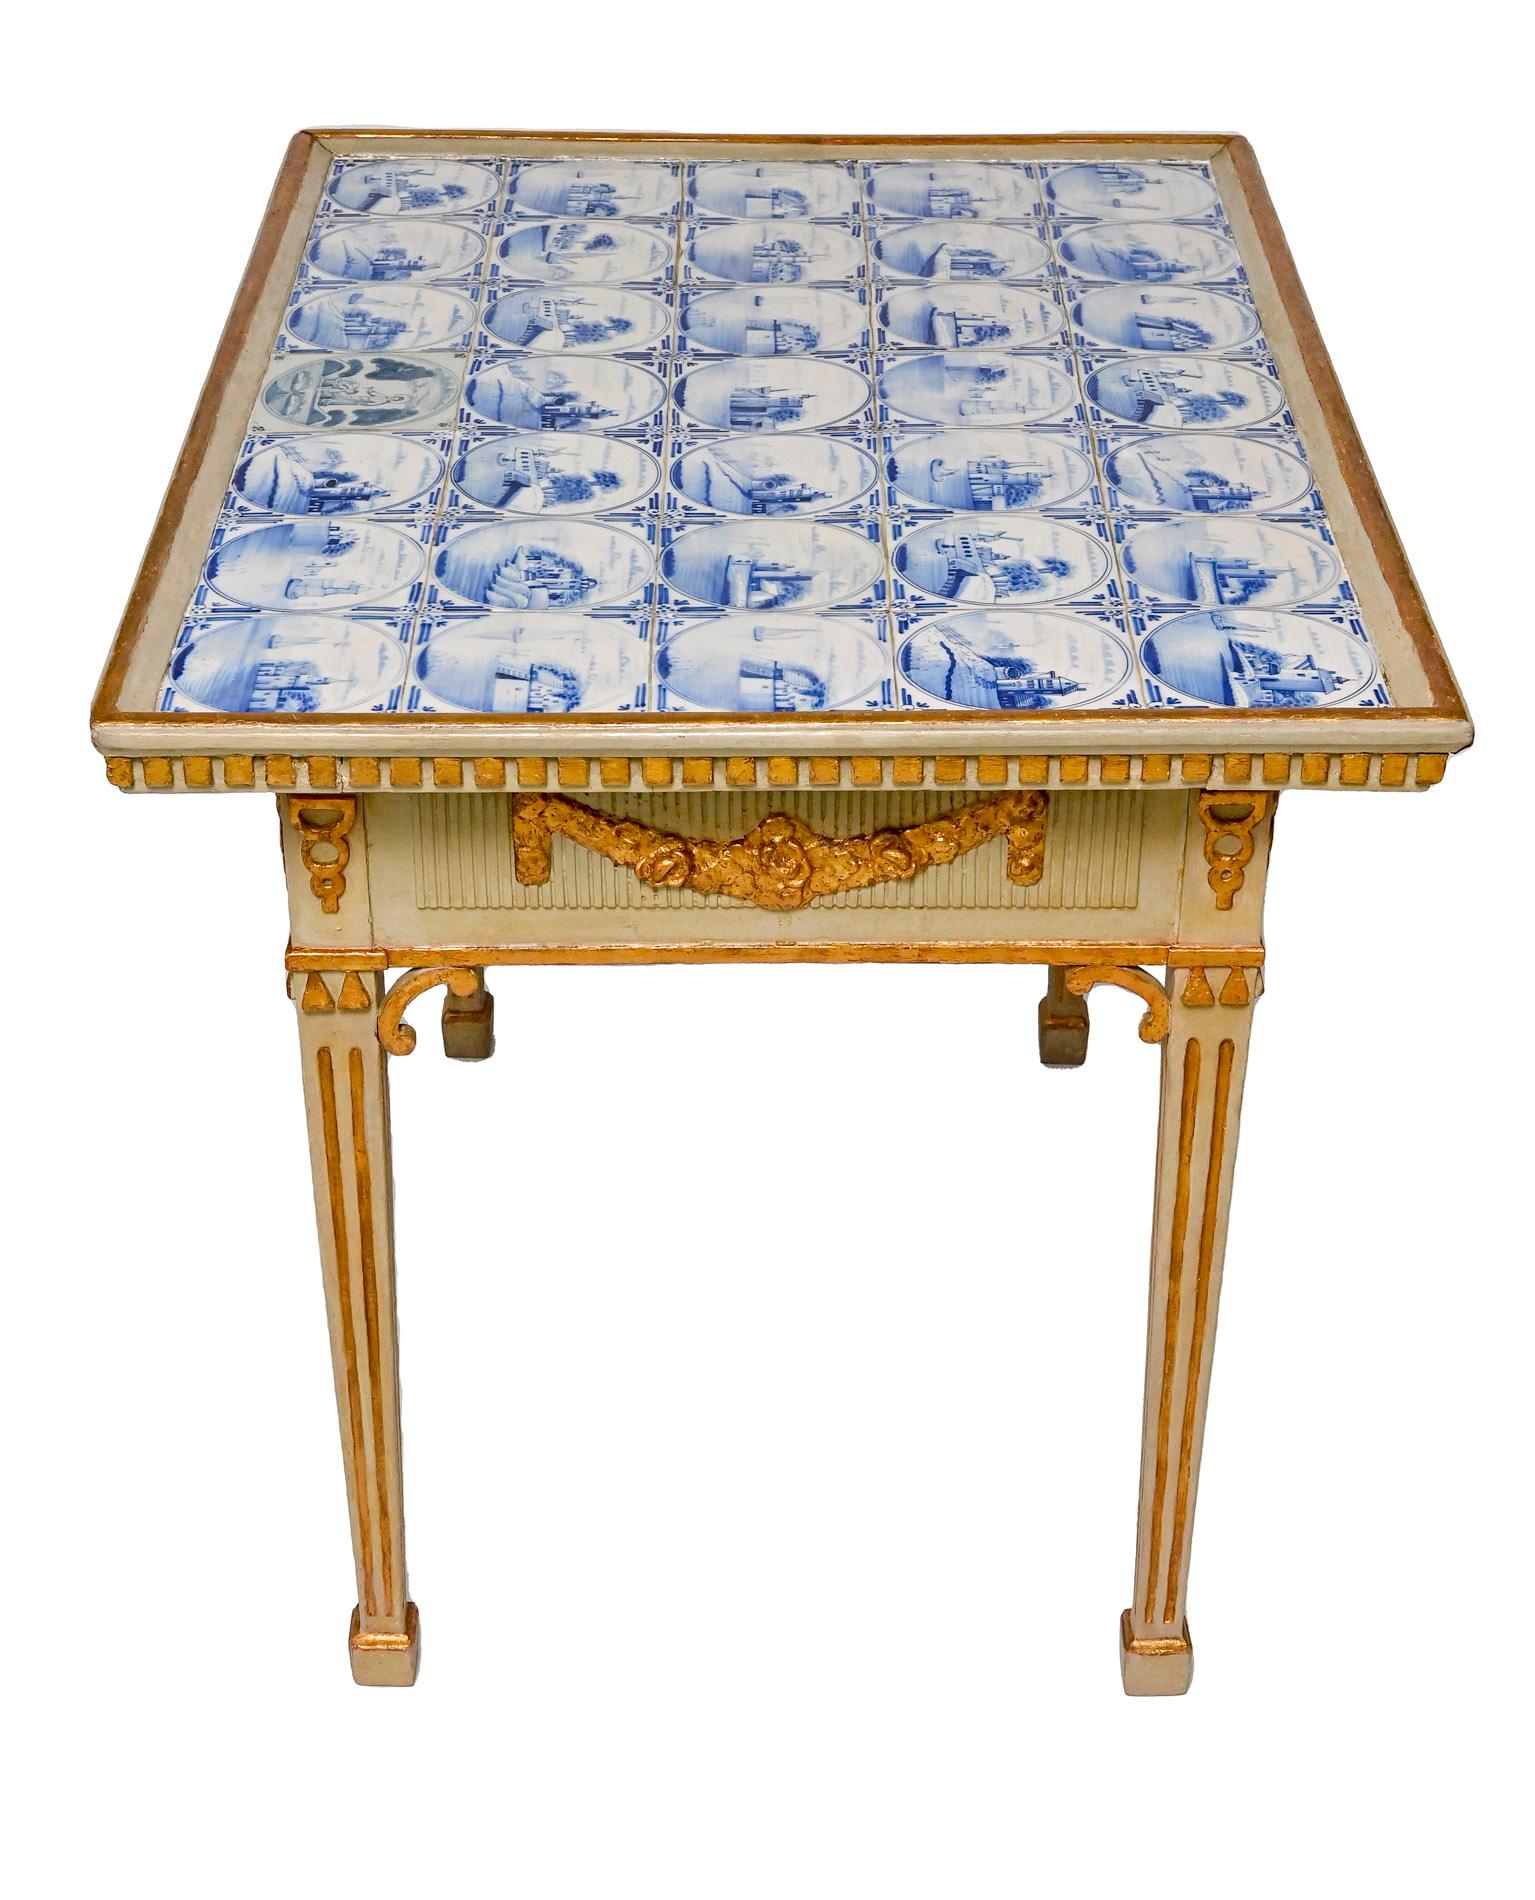 18th Century Table with Delft Tiles Schleswig Holstein Gray and Gilding In Good Condition For Sale In Epfach, DE